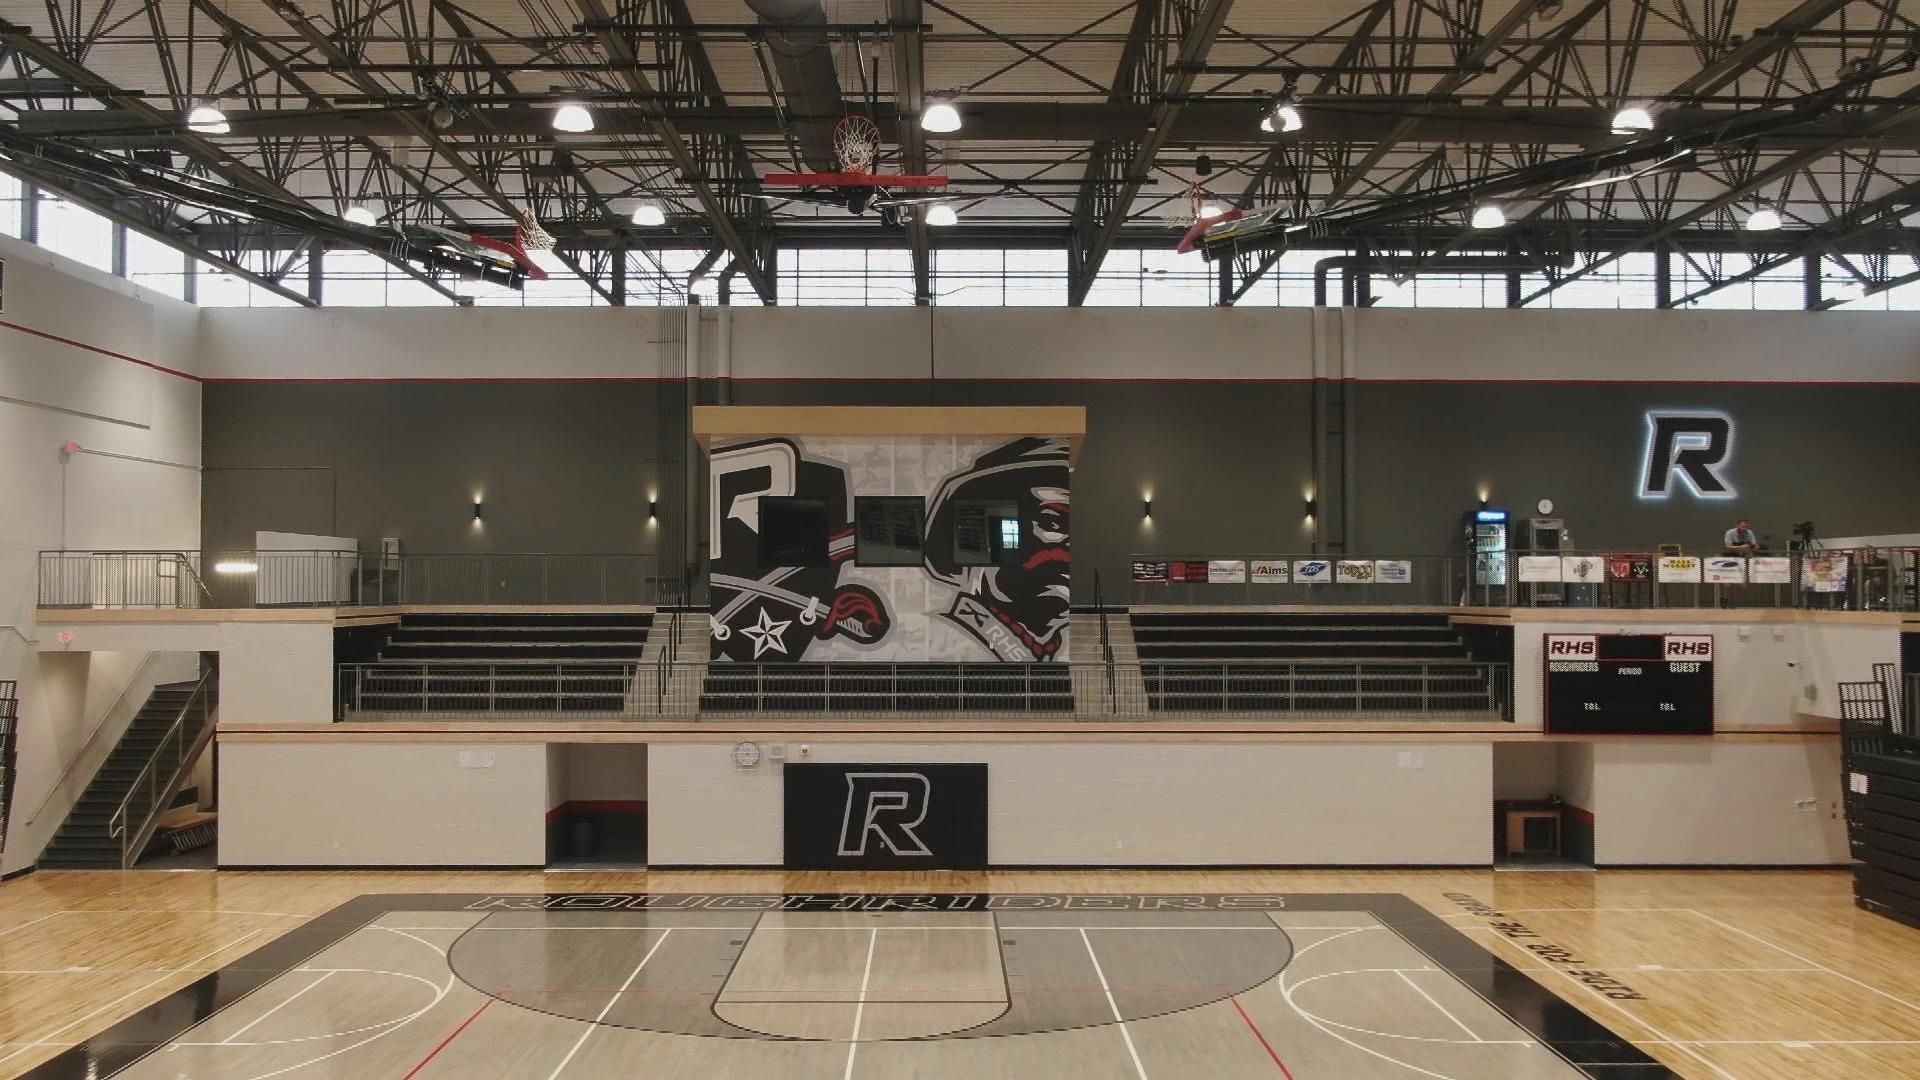 The Roughriders boast state-of-the-art athletic facilities at their new high school.